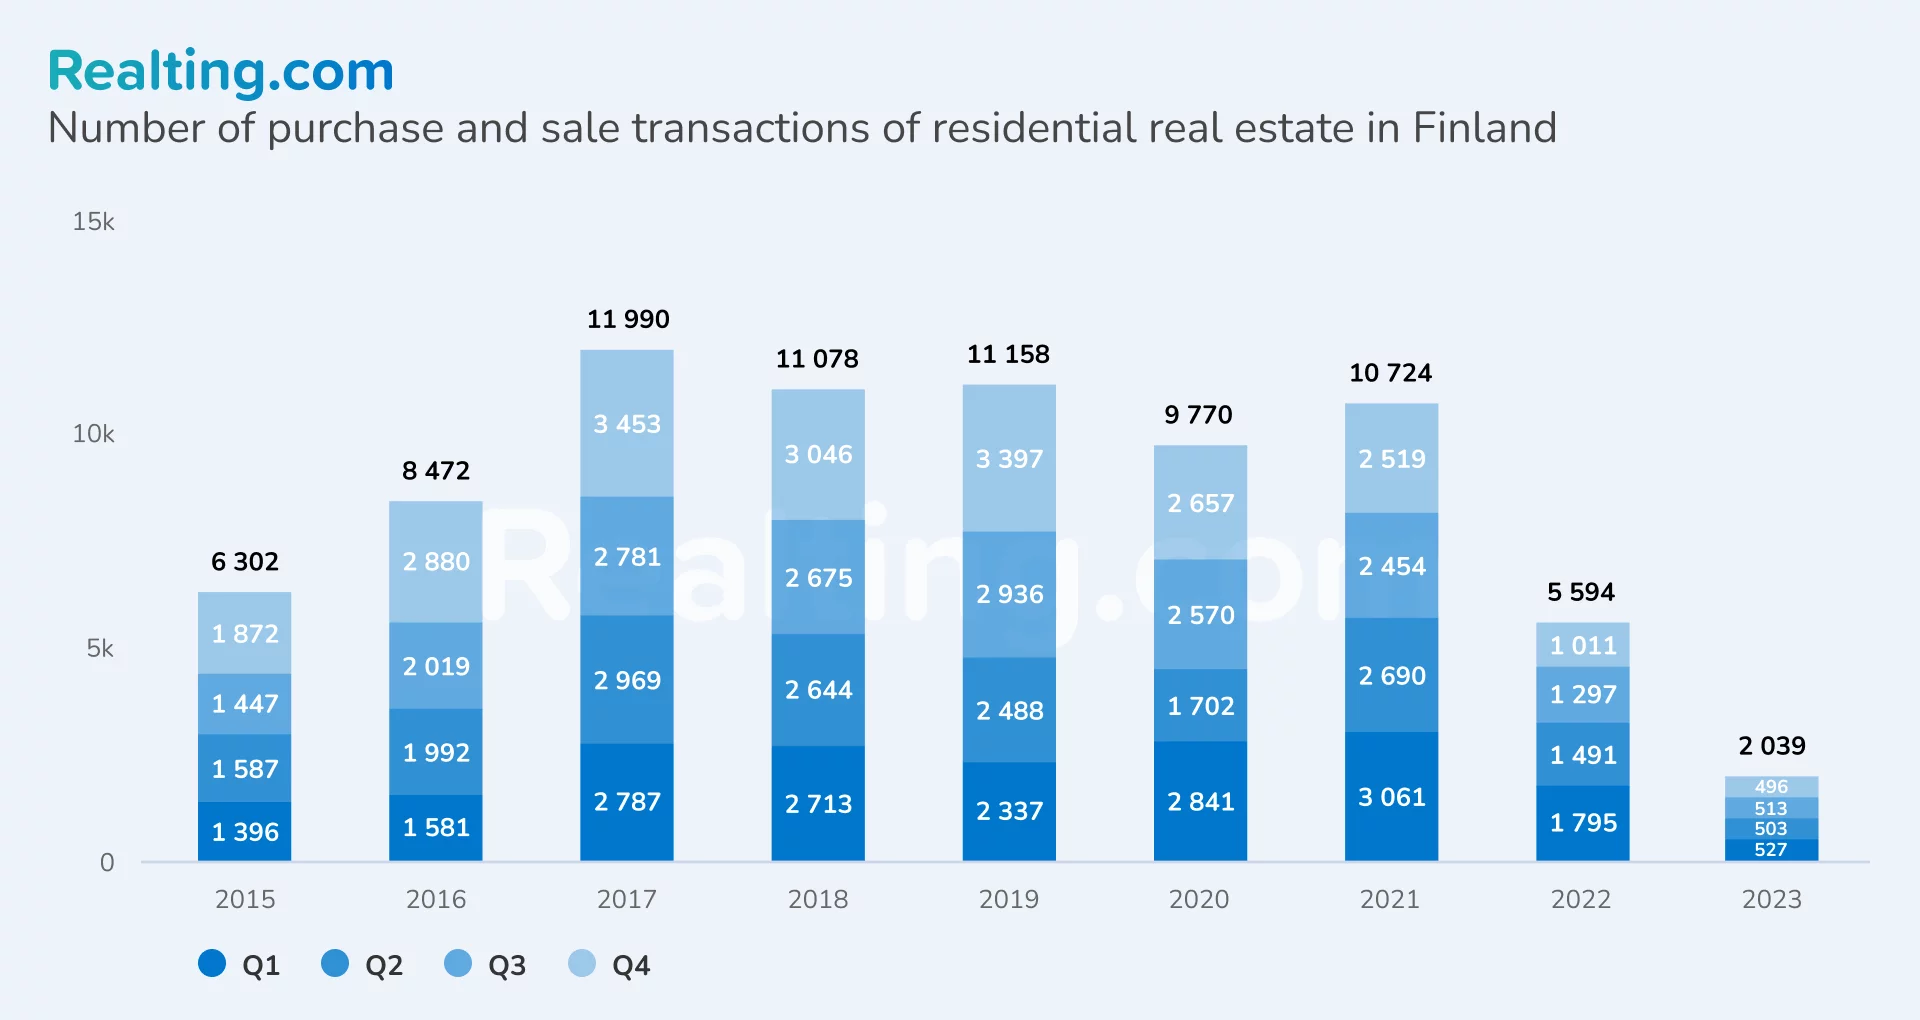 Number of purchase and sale transactions of residential real estate in Finland